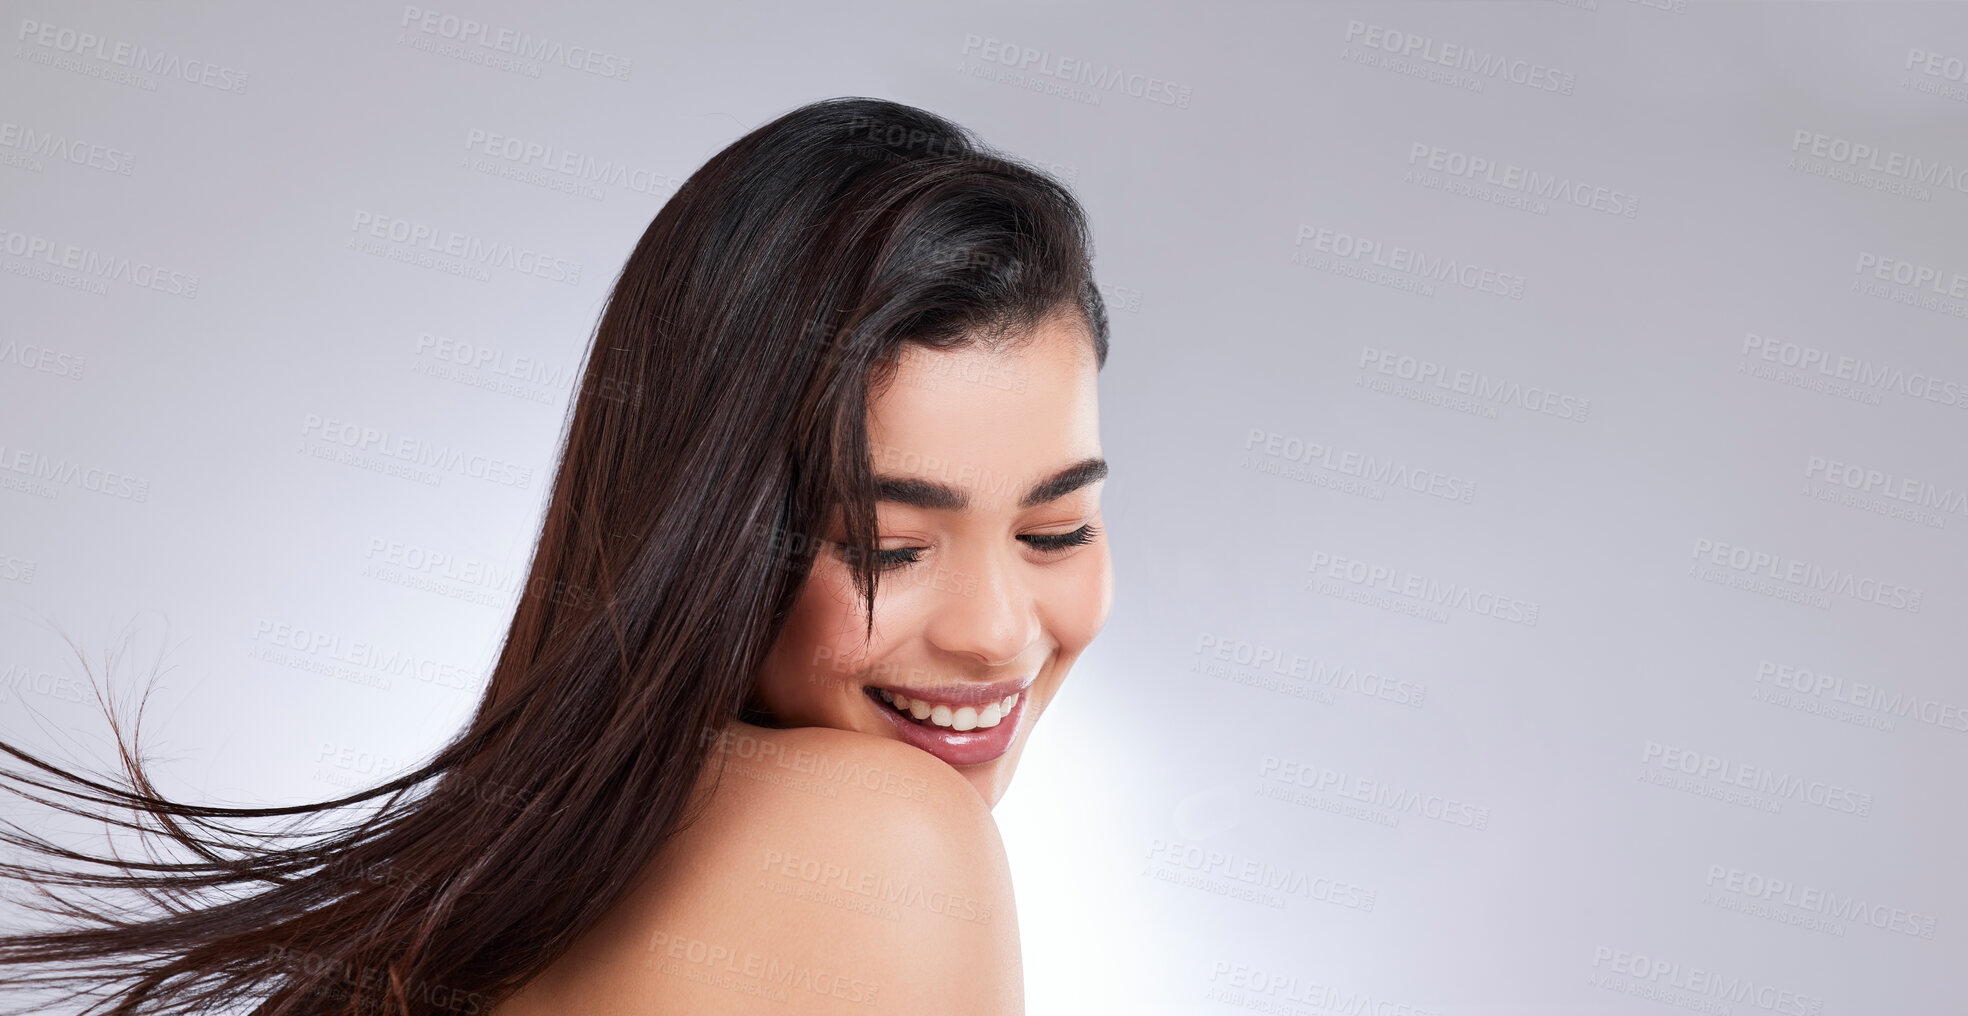 Buy stock photo Studio shot of an attractive young woman posing against a grey background